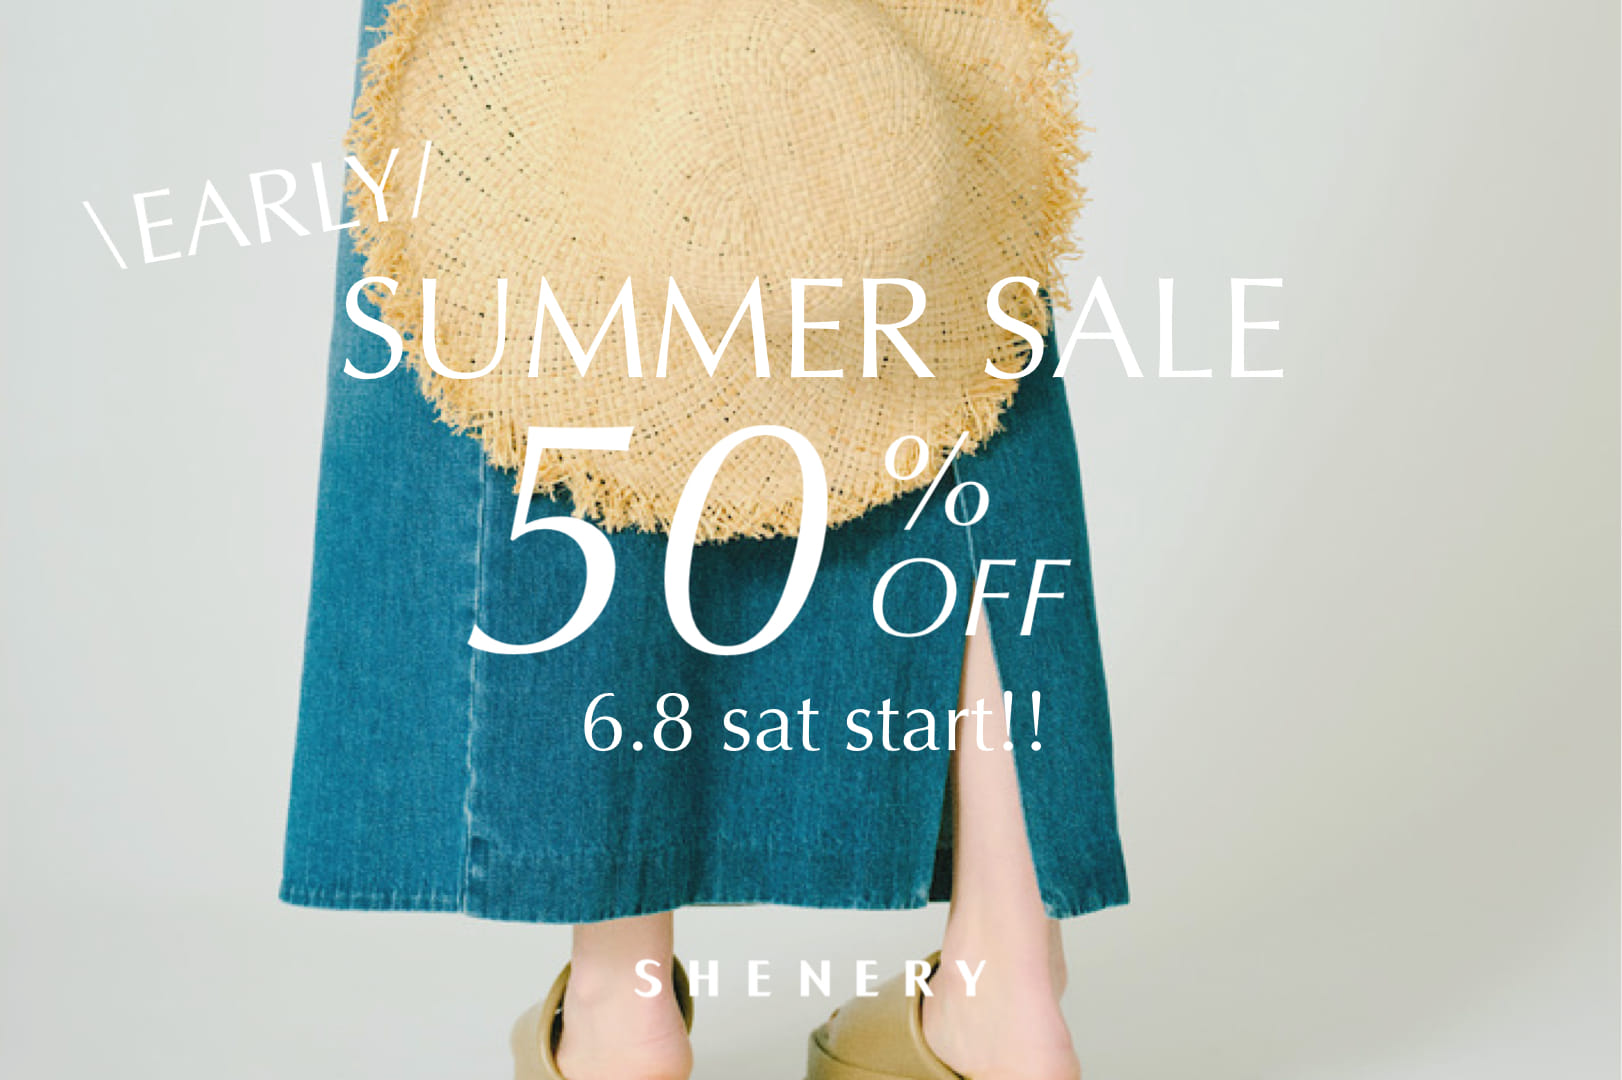 SHENERY 【SHENERY】EARLY SUMMER SALE 50％OFF開催中！